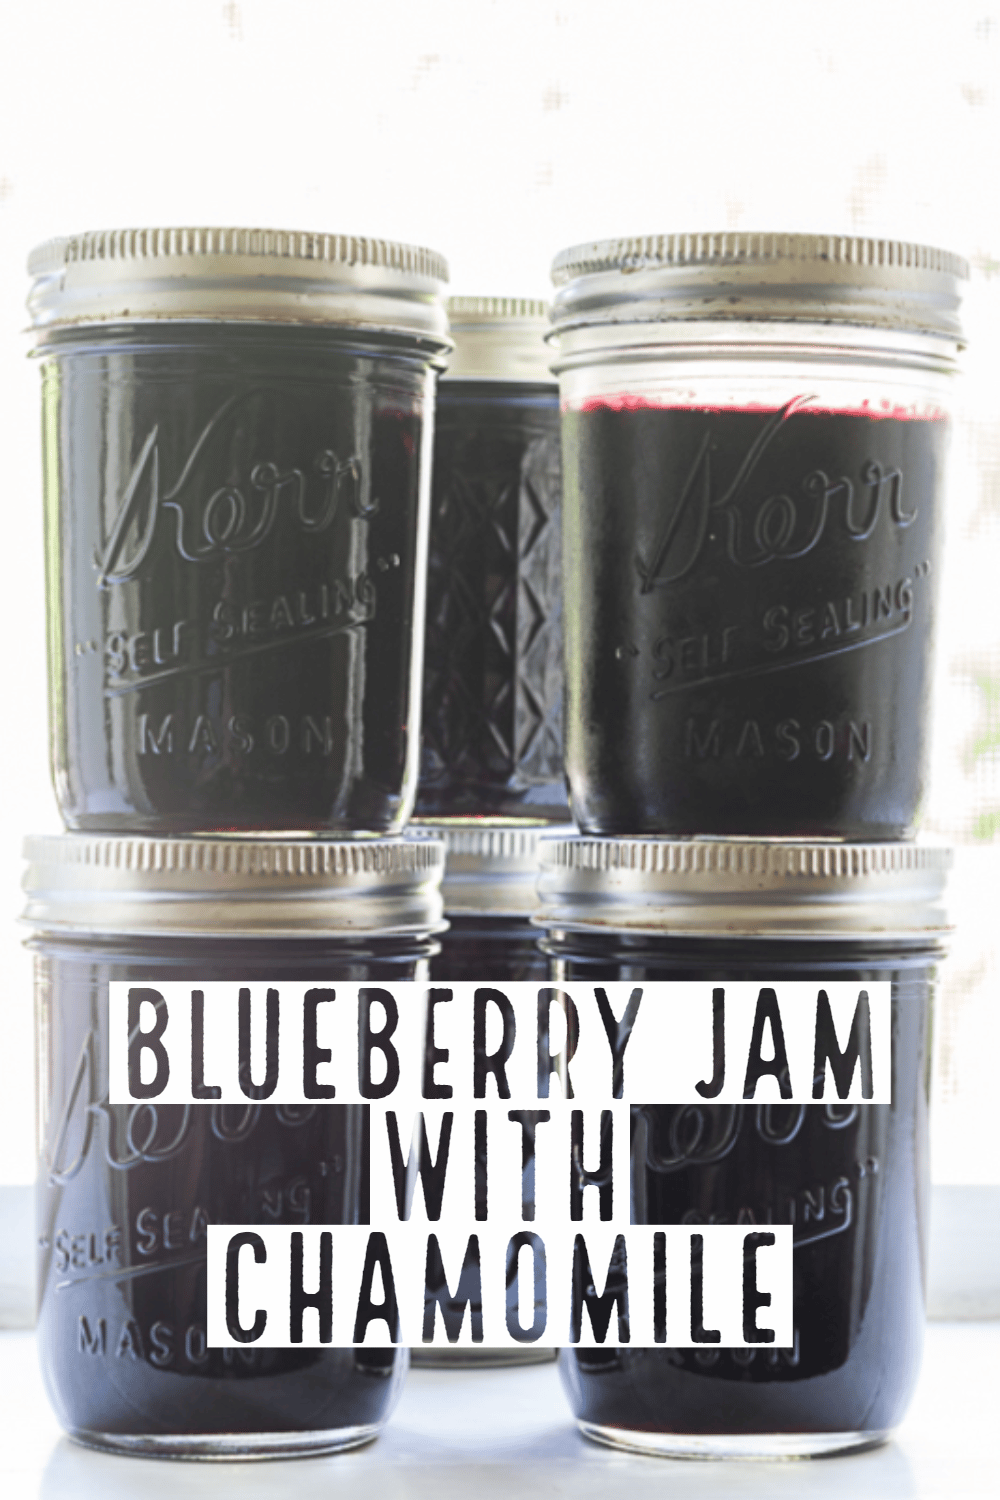 A blueberry jam recipe infused with chamomile, preserved by water bath canning. Canning this blueberry jam recipe lets you enjoy them for months to come.